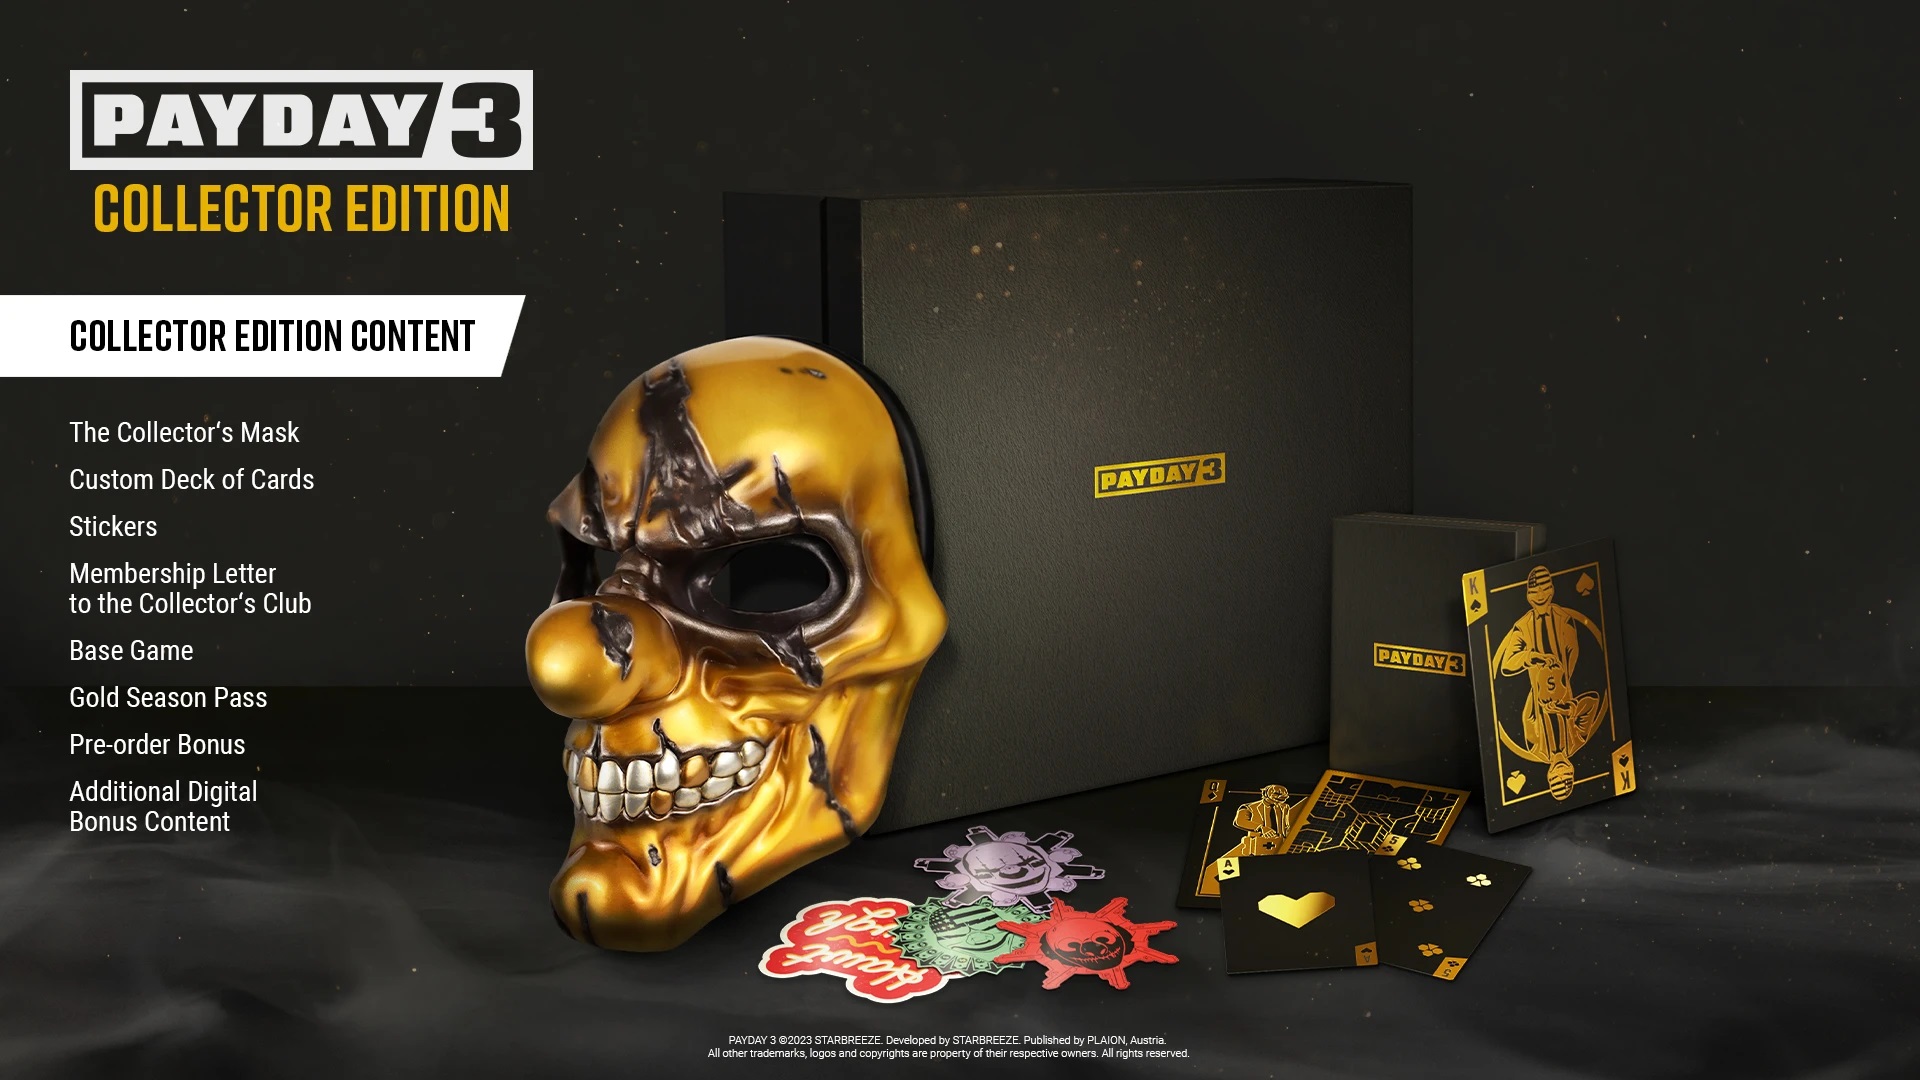 Payday 3 Collector's Edition